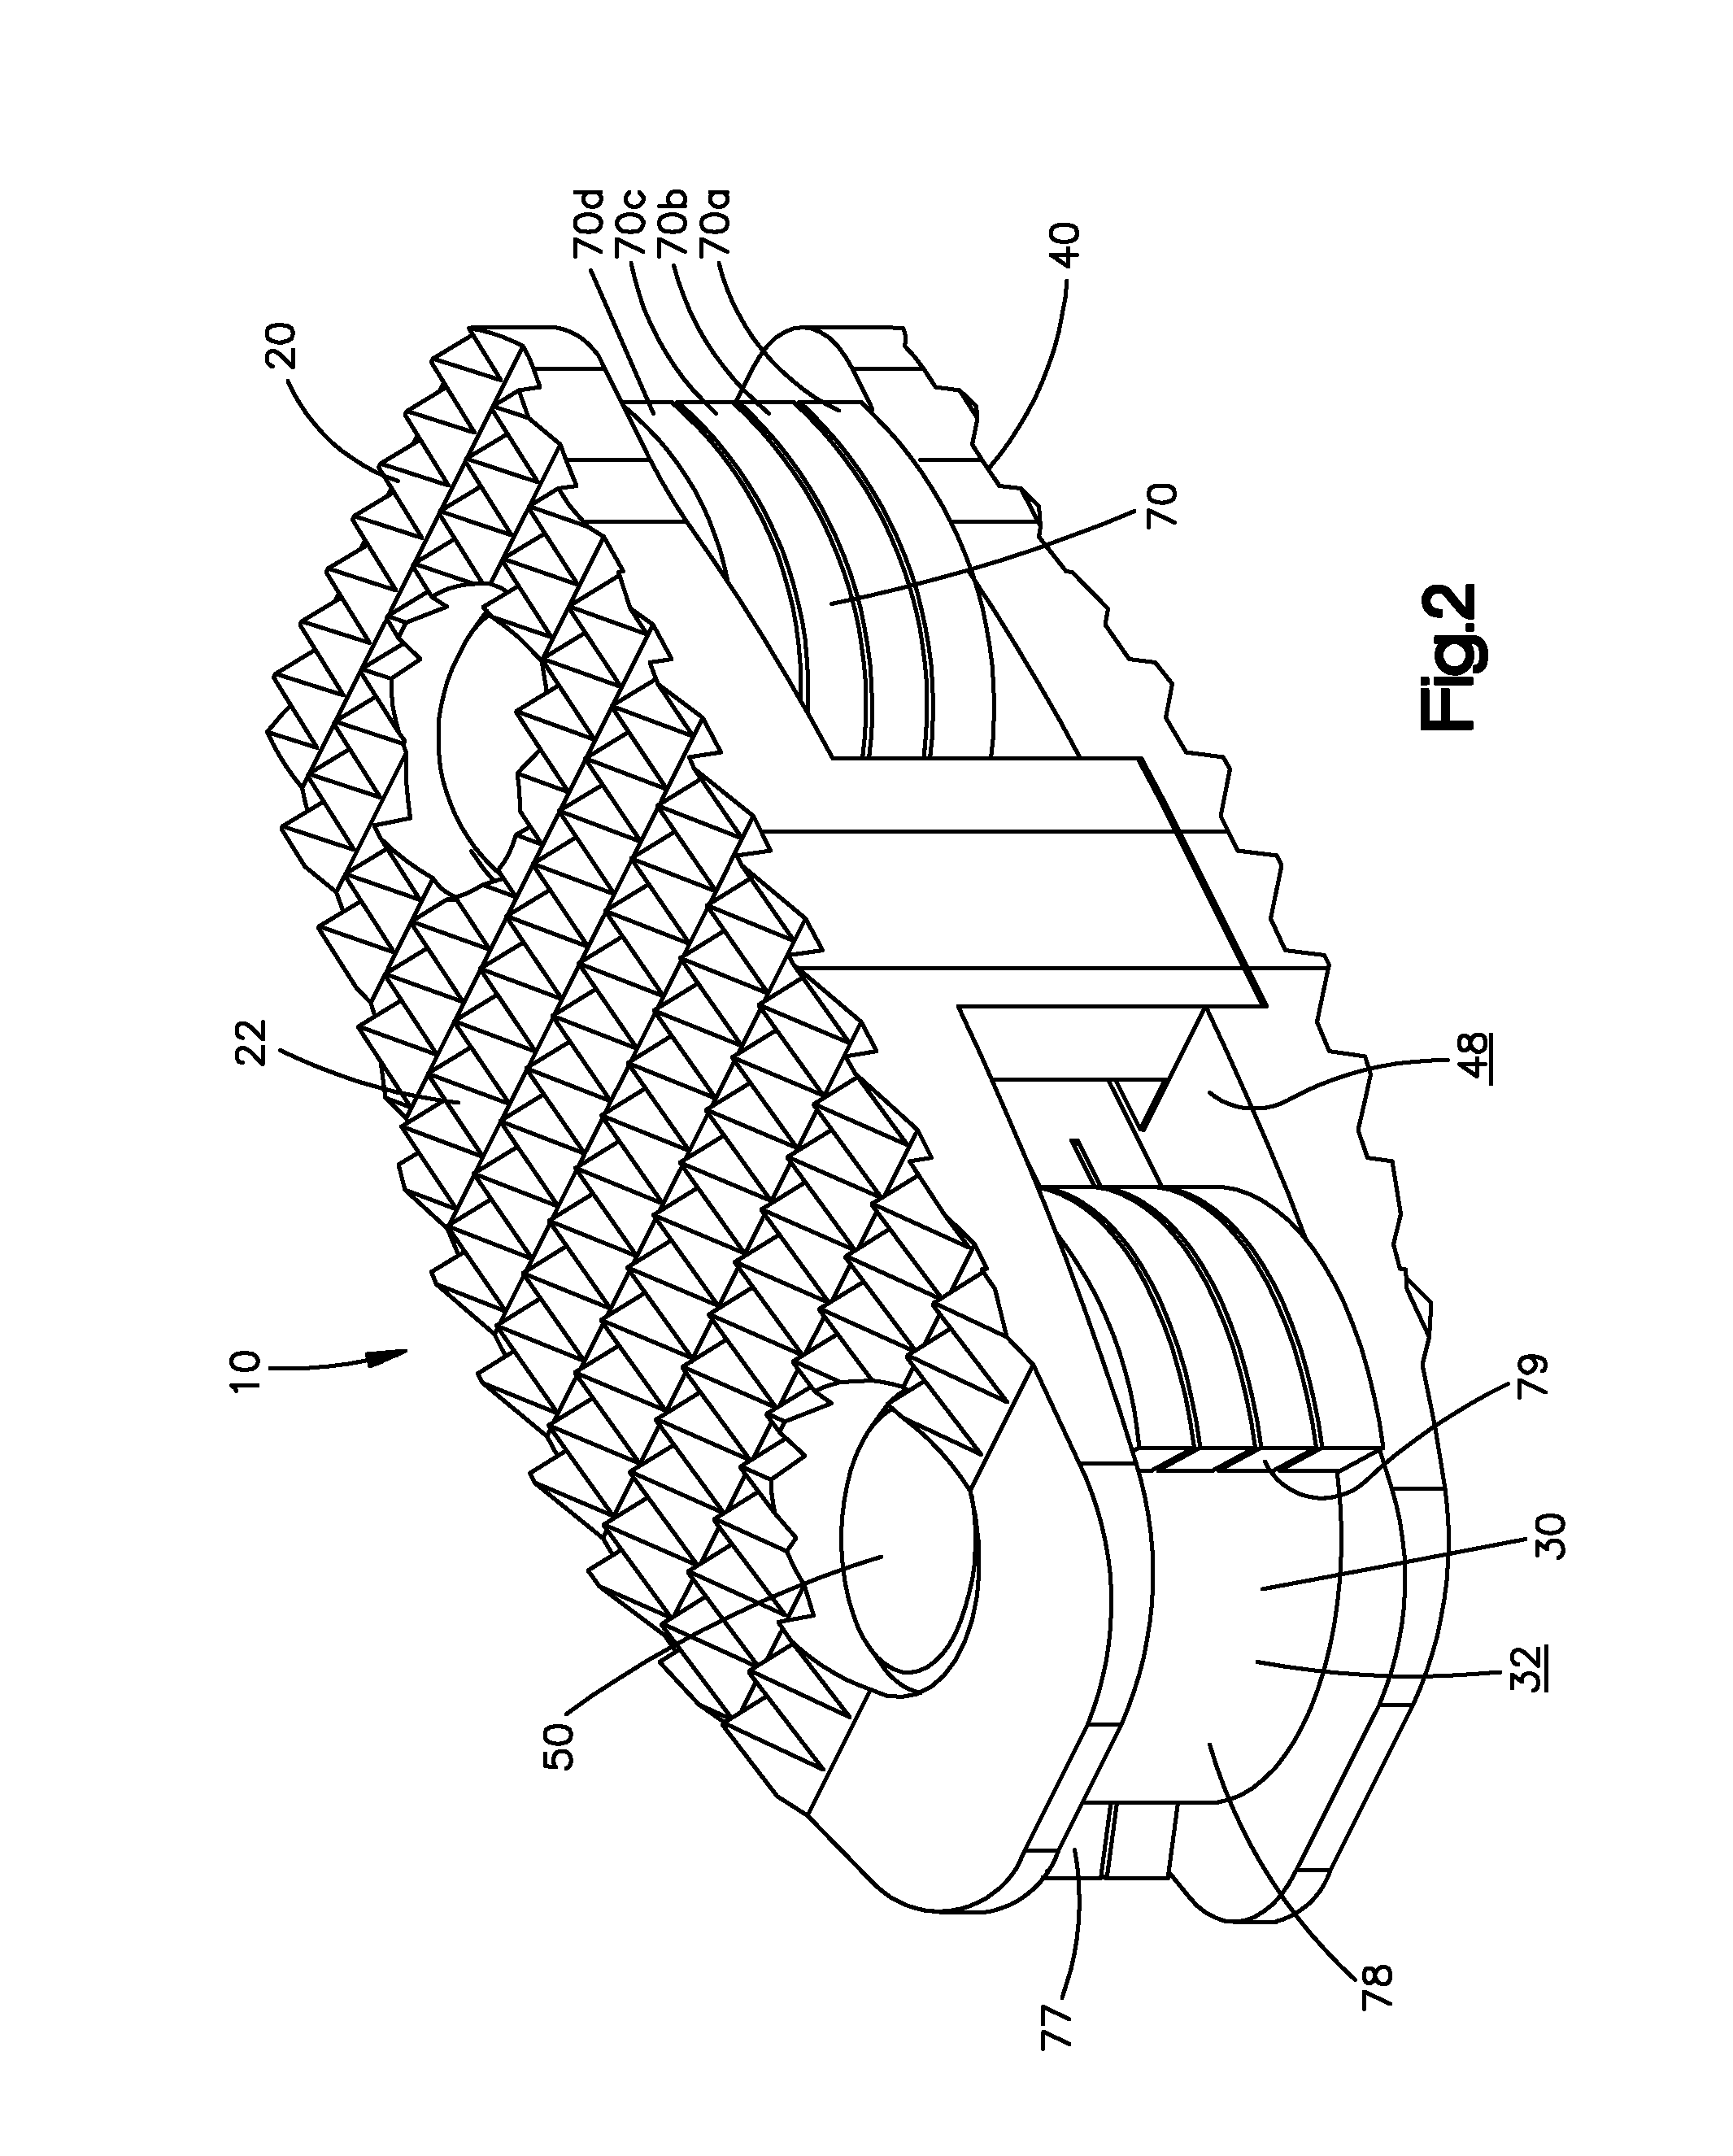 Expandable interbody spacer device